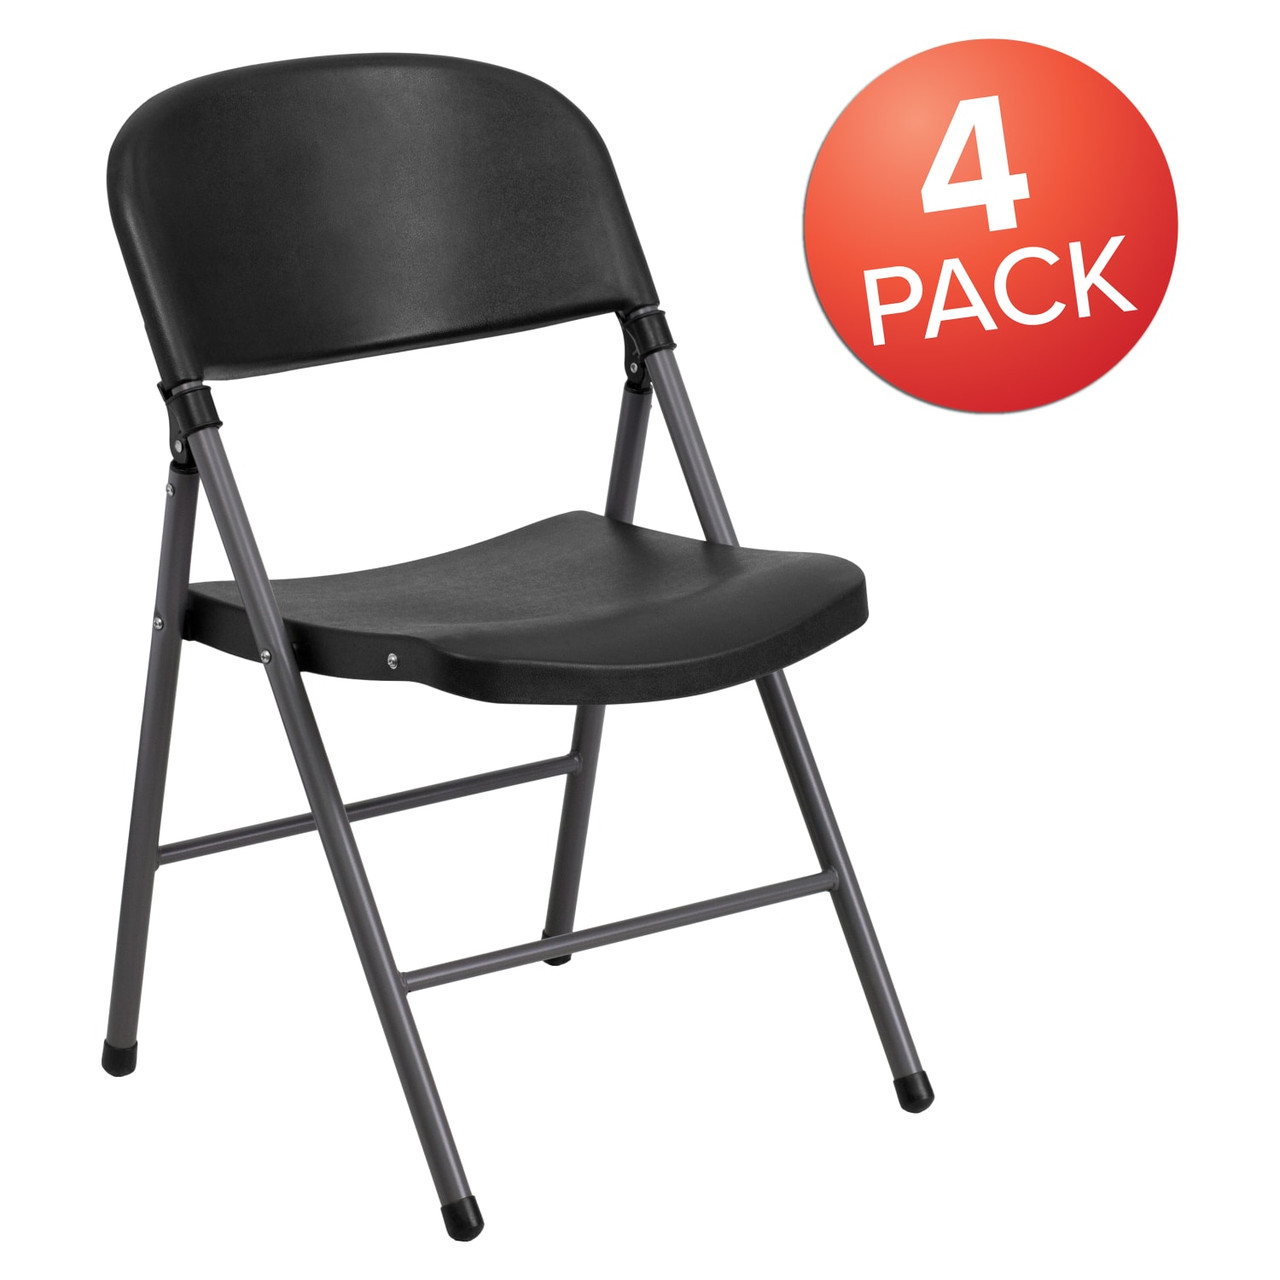 4 Pack Hercules  Black Plastic Folding Chair with Charcoal Frame